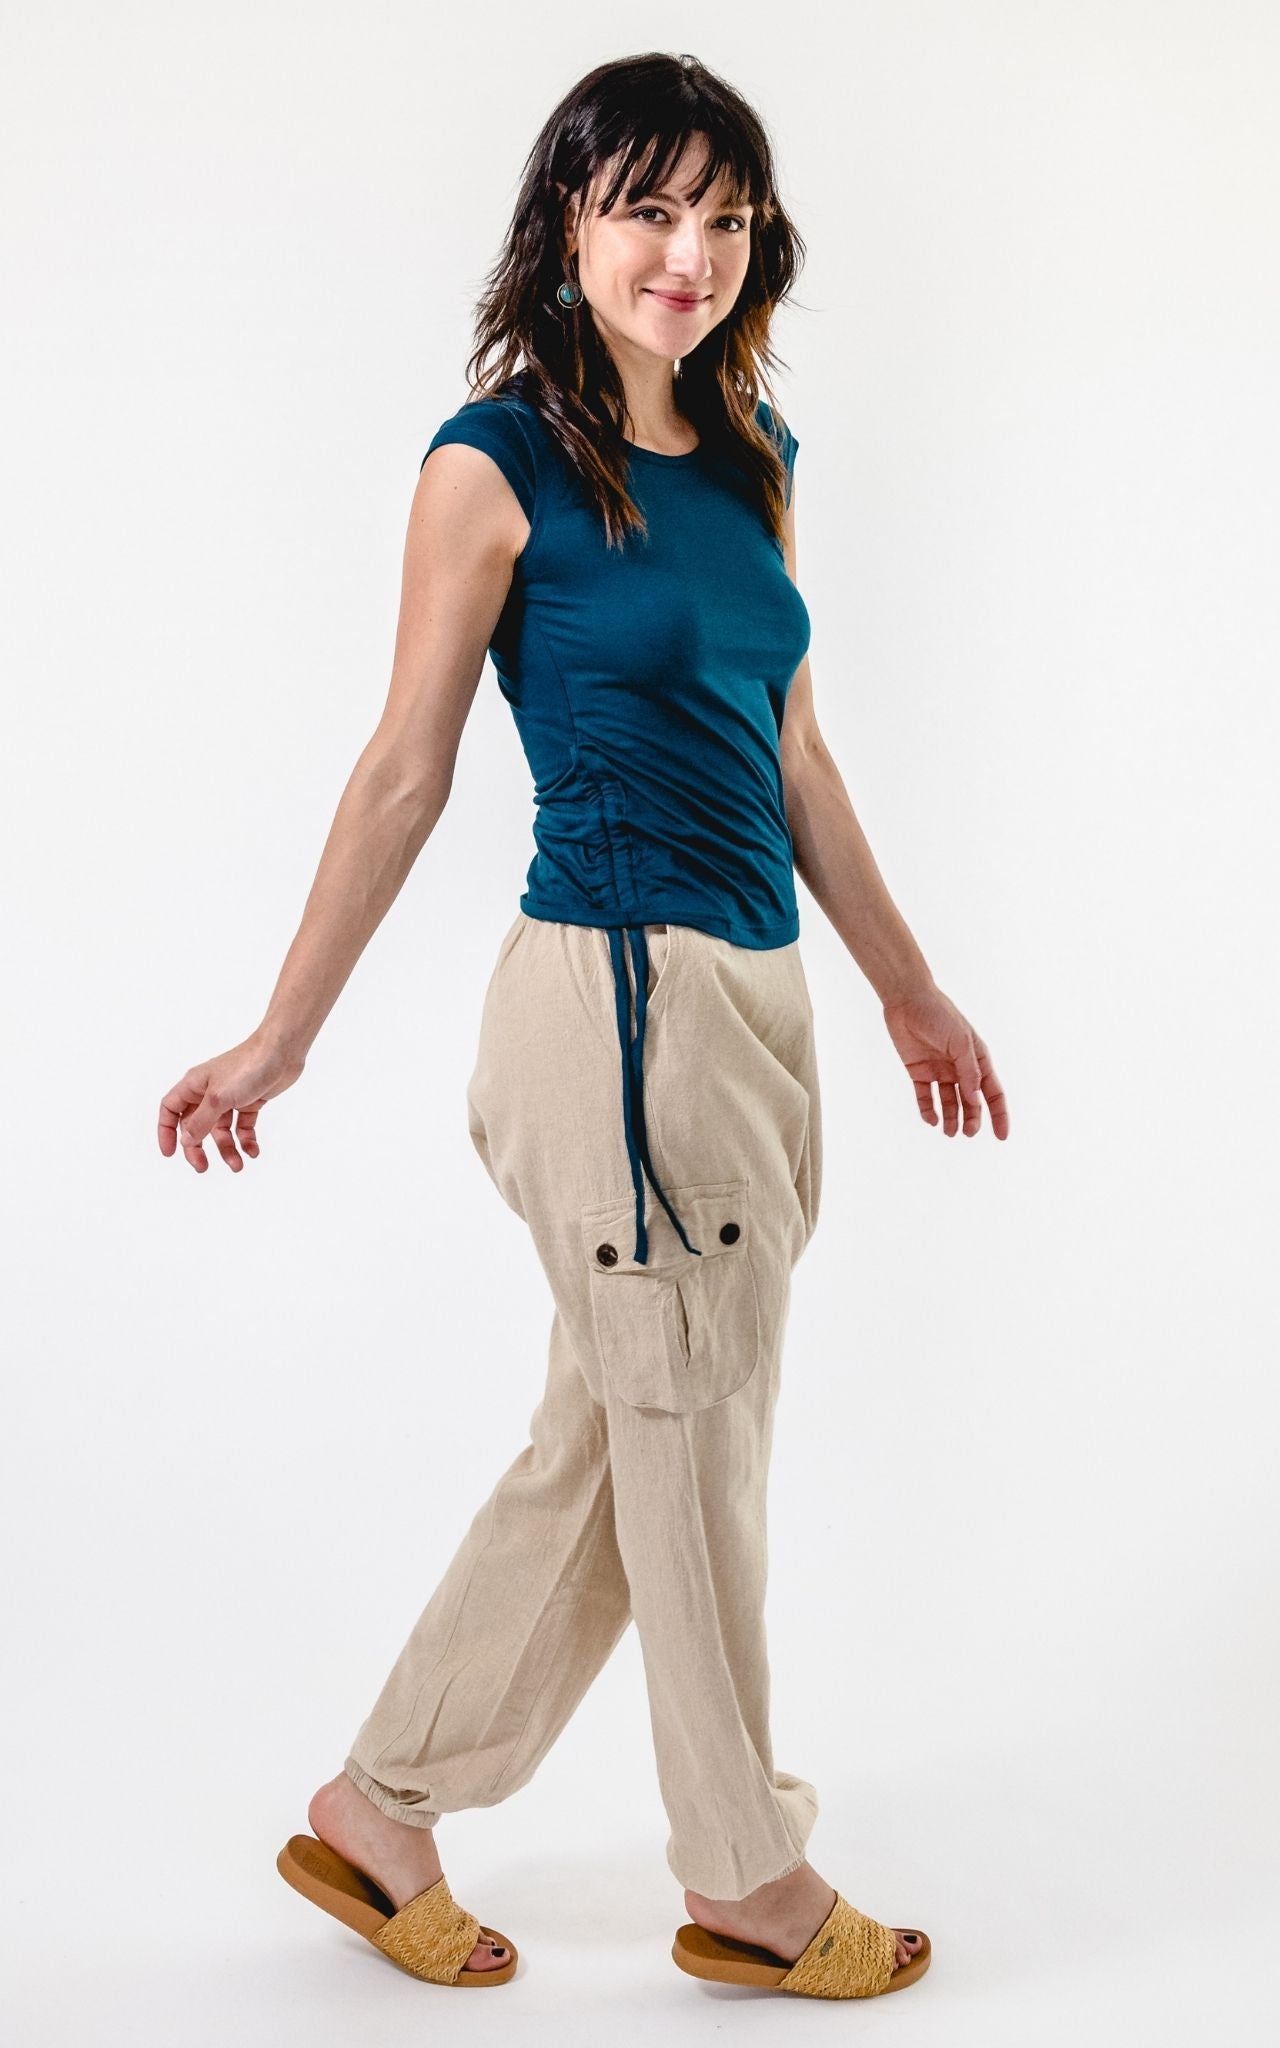 Surya Australia Ethical Drop Crotch Pants Made in Nepal - Natural